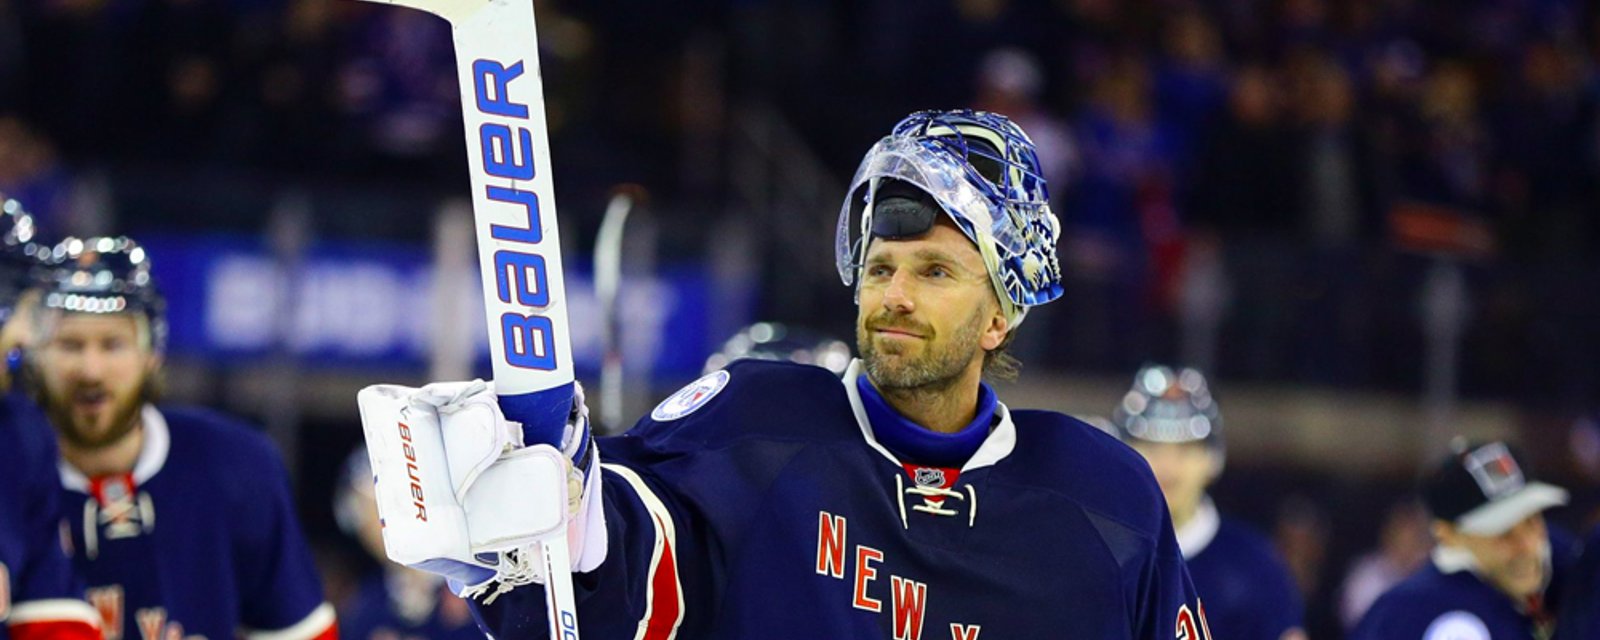 Lundqvist steps up to feed New Yorkers